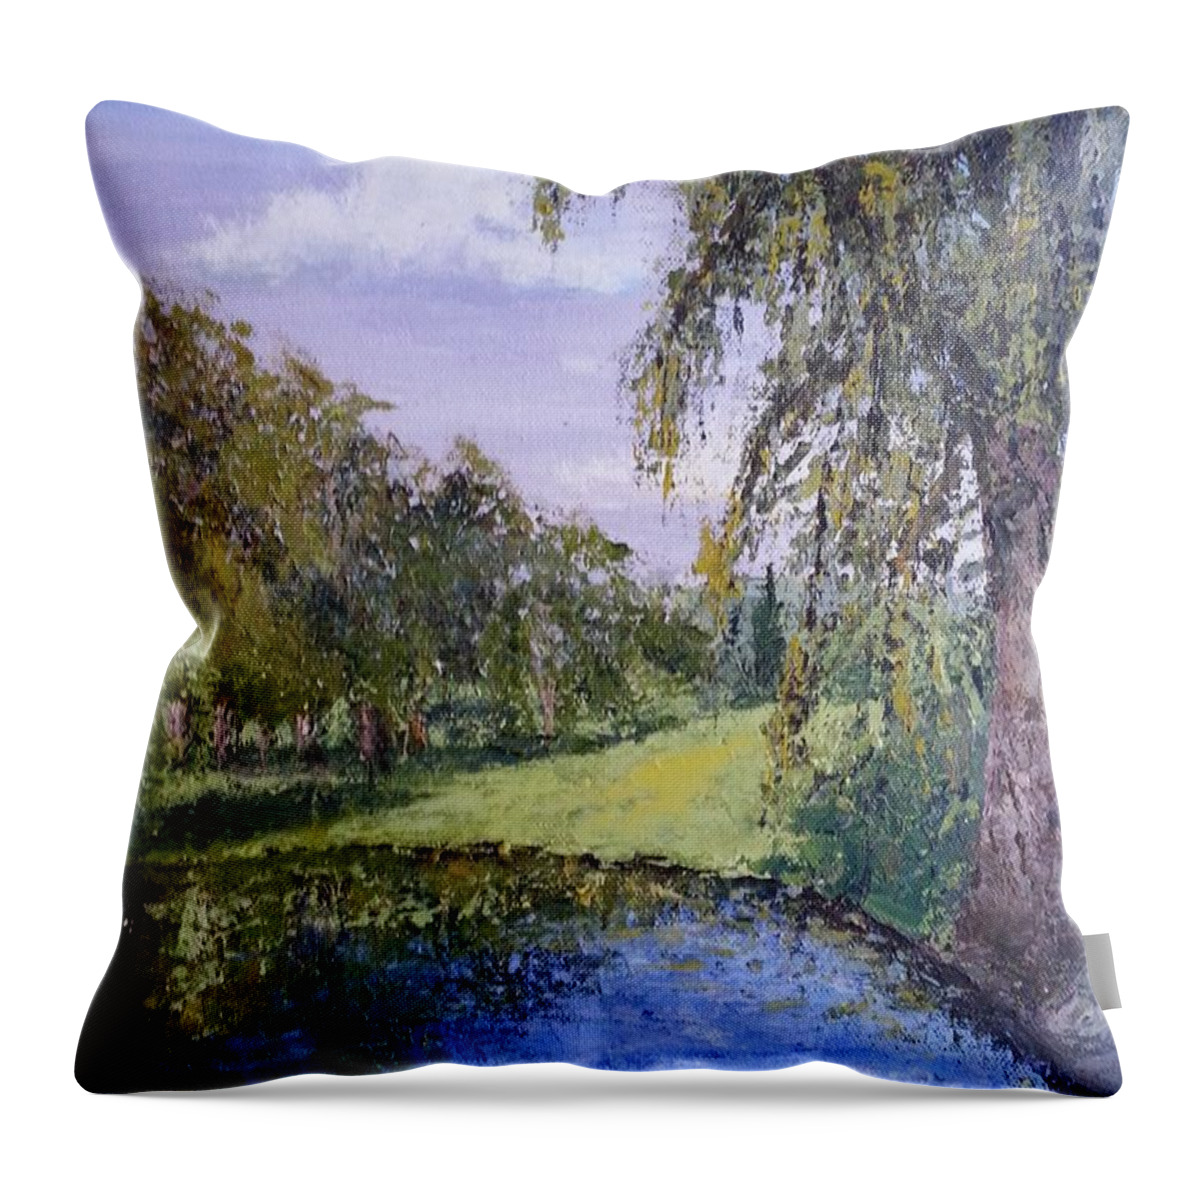 Palette Knife Painting Throw Pillow featuring the painting Putting Green Pond by Mishel Vanderten